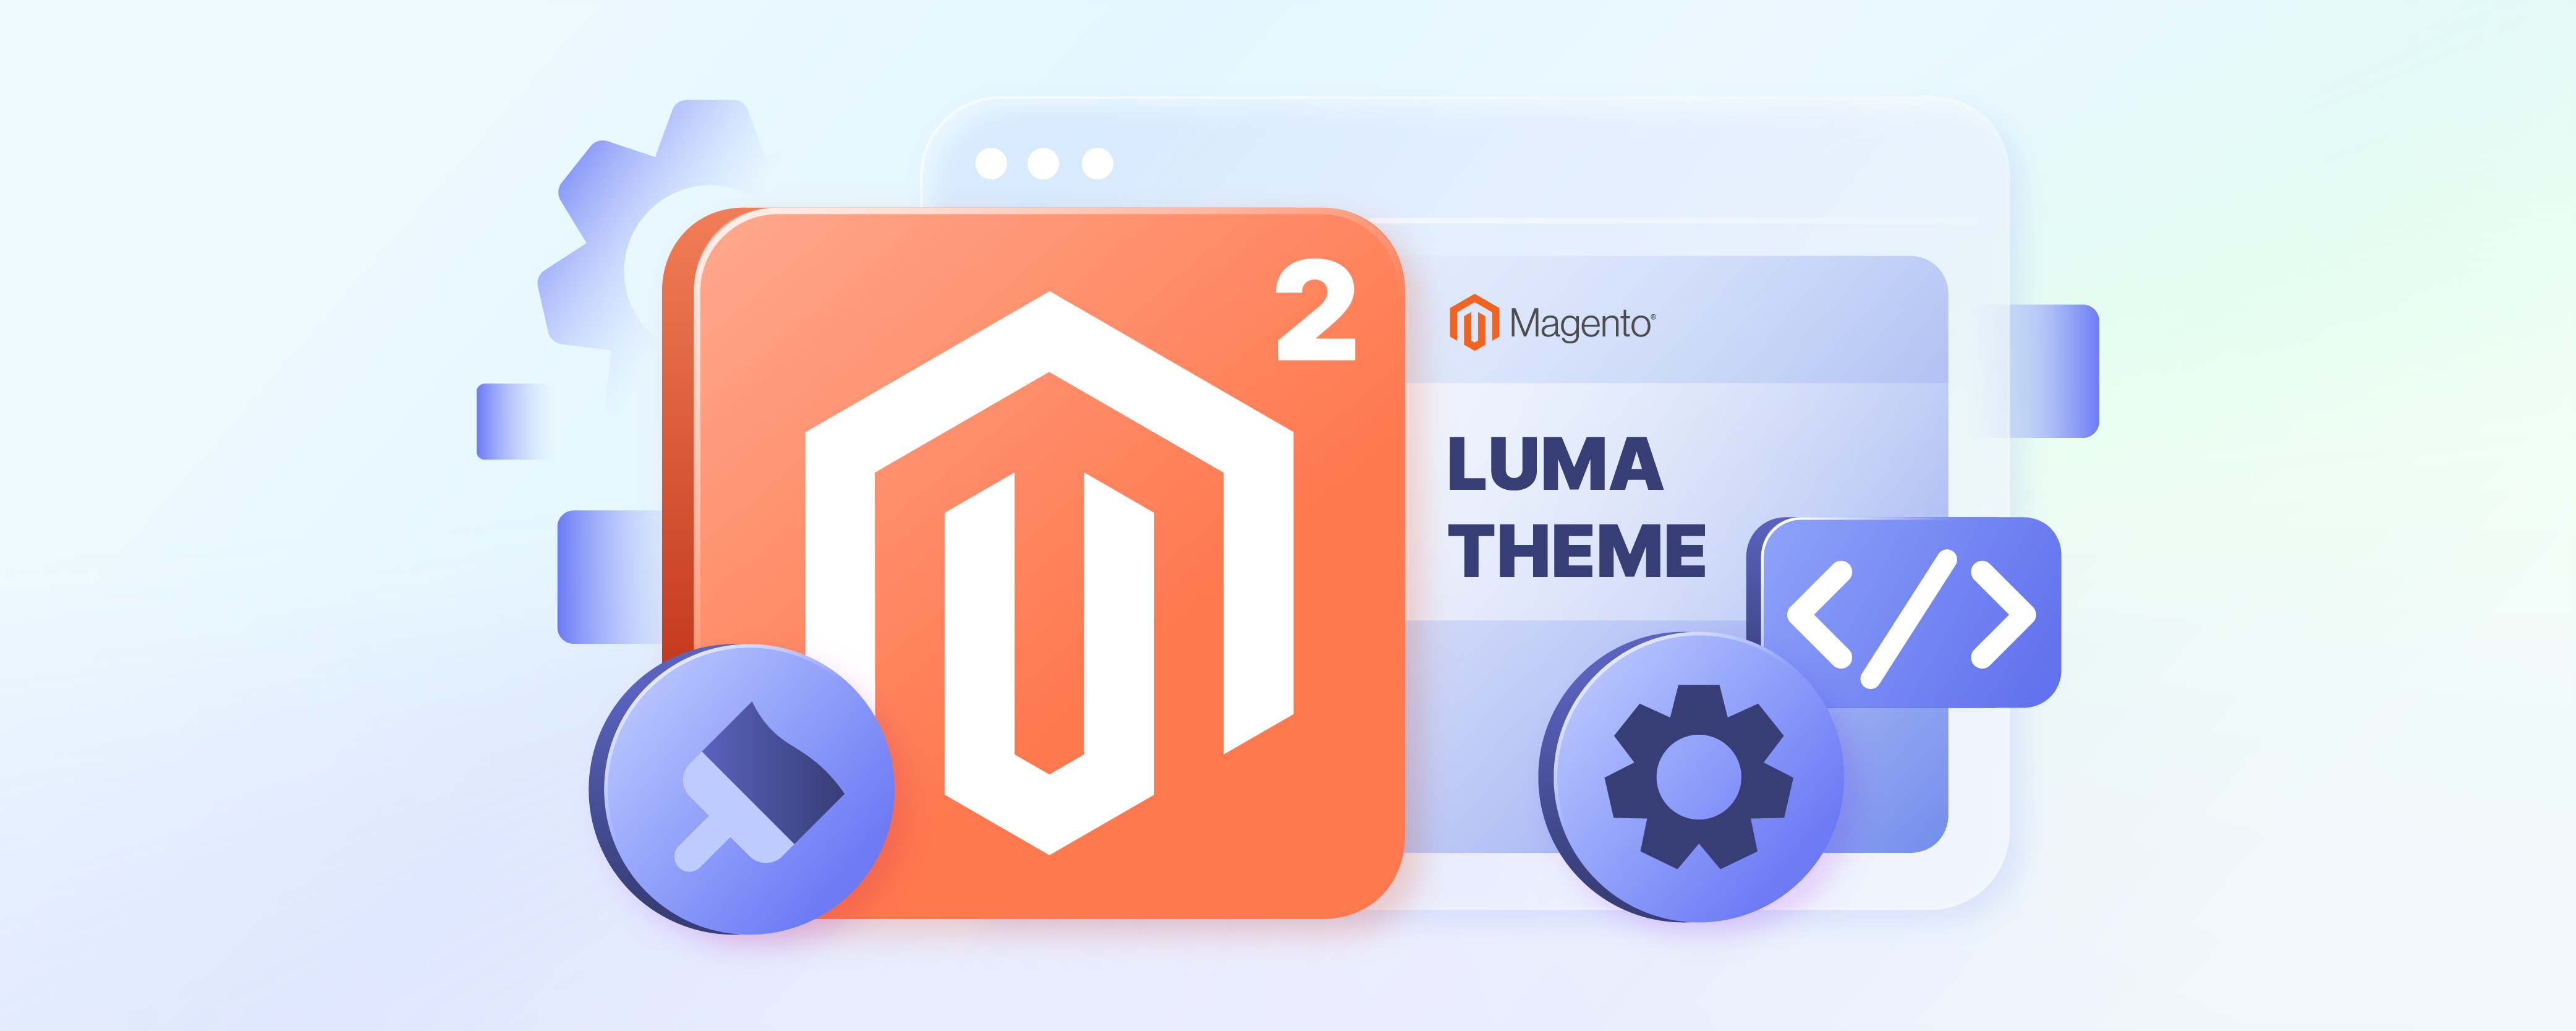 How to Install Theme in Magento 2? 3 Ways